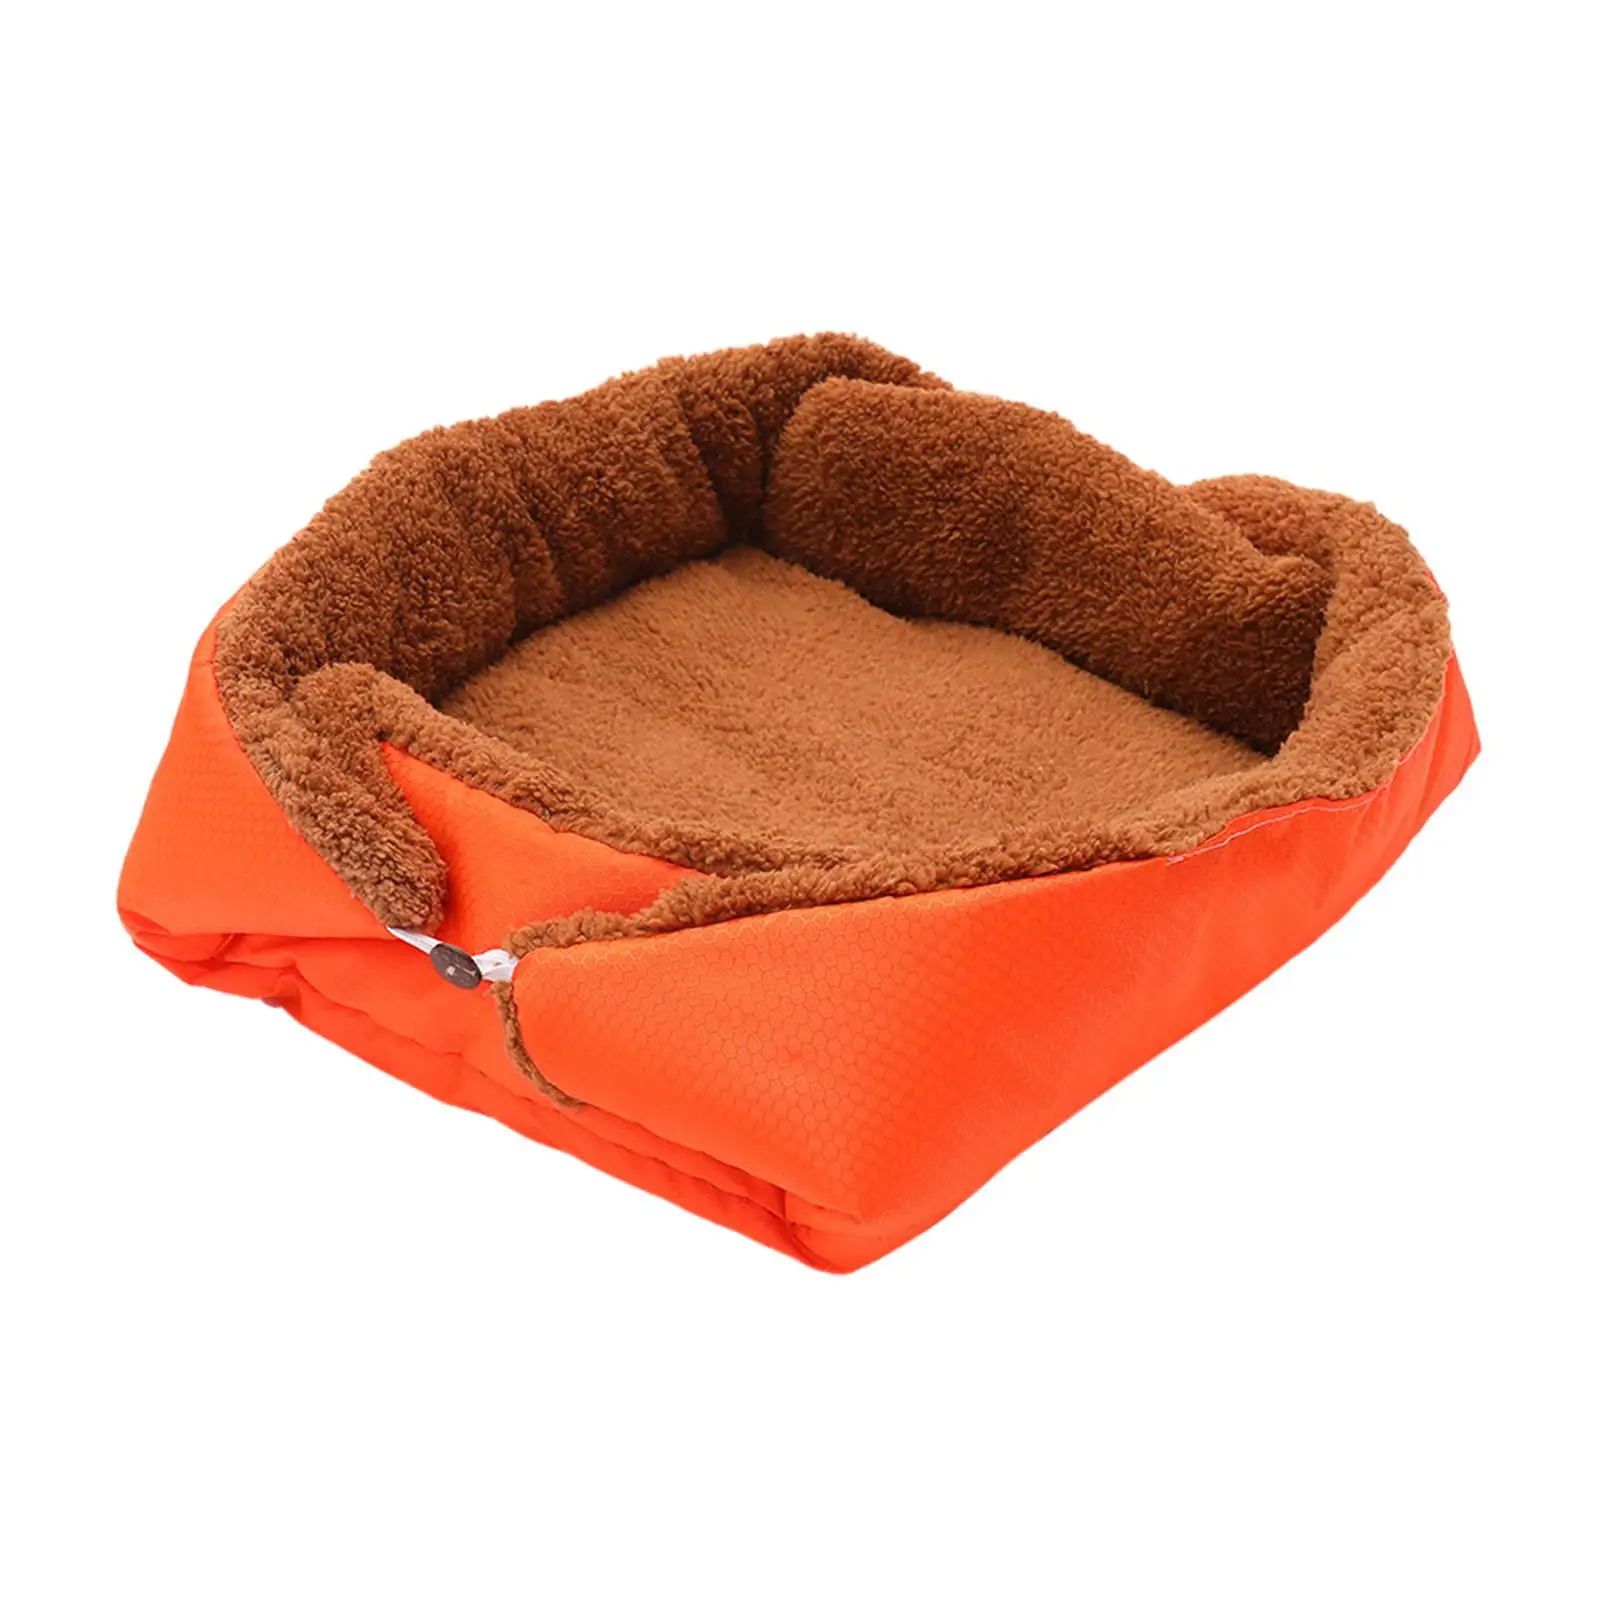 Pet Bed Cat Sleeping Pad Dog Beds Kennel Comfortable Winter Warm Nest Cat Bed Blanket Cushion for Cats Dogs Pets Supplies